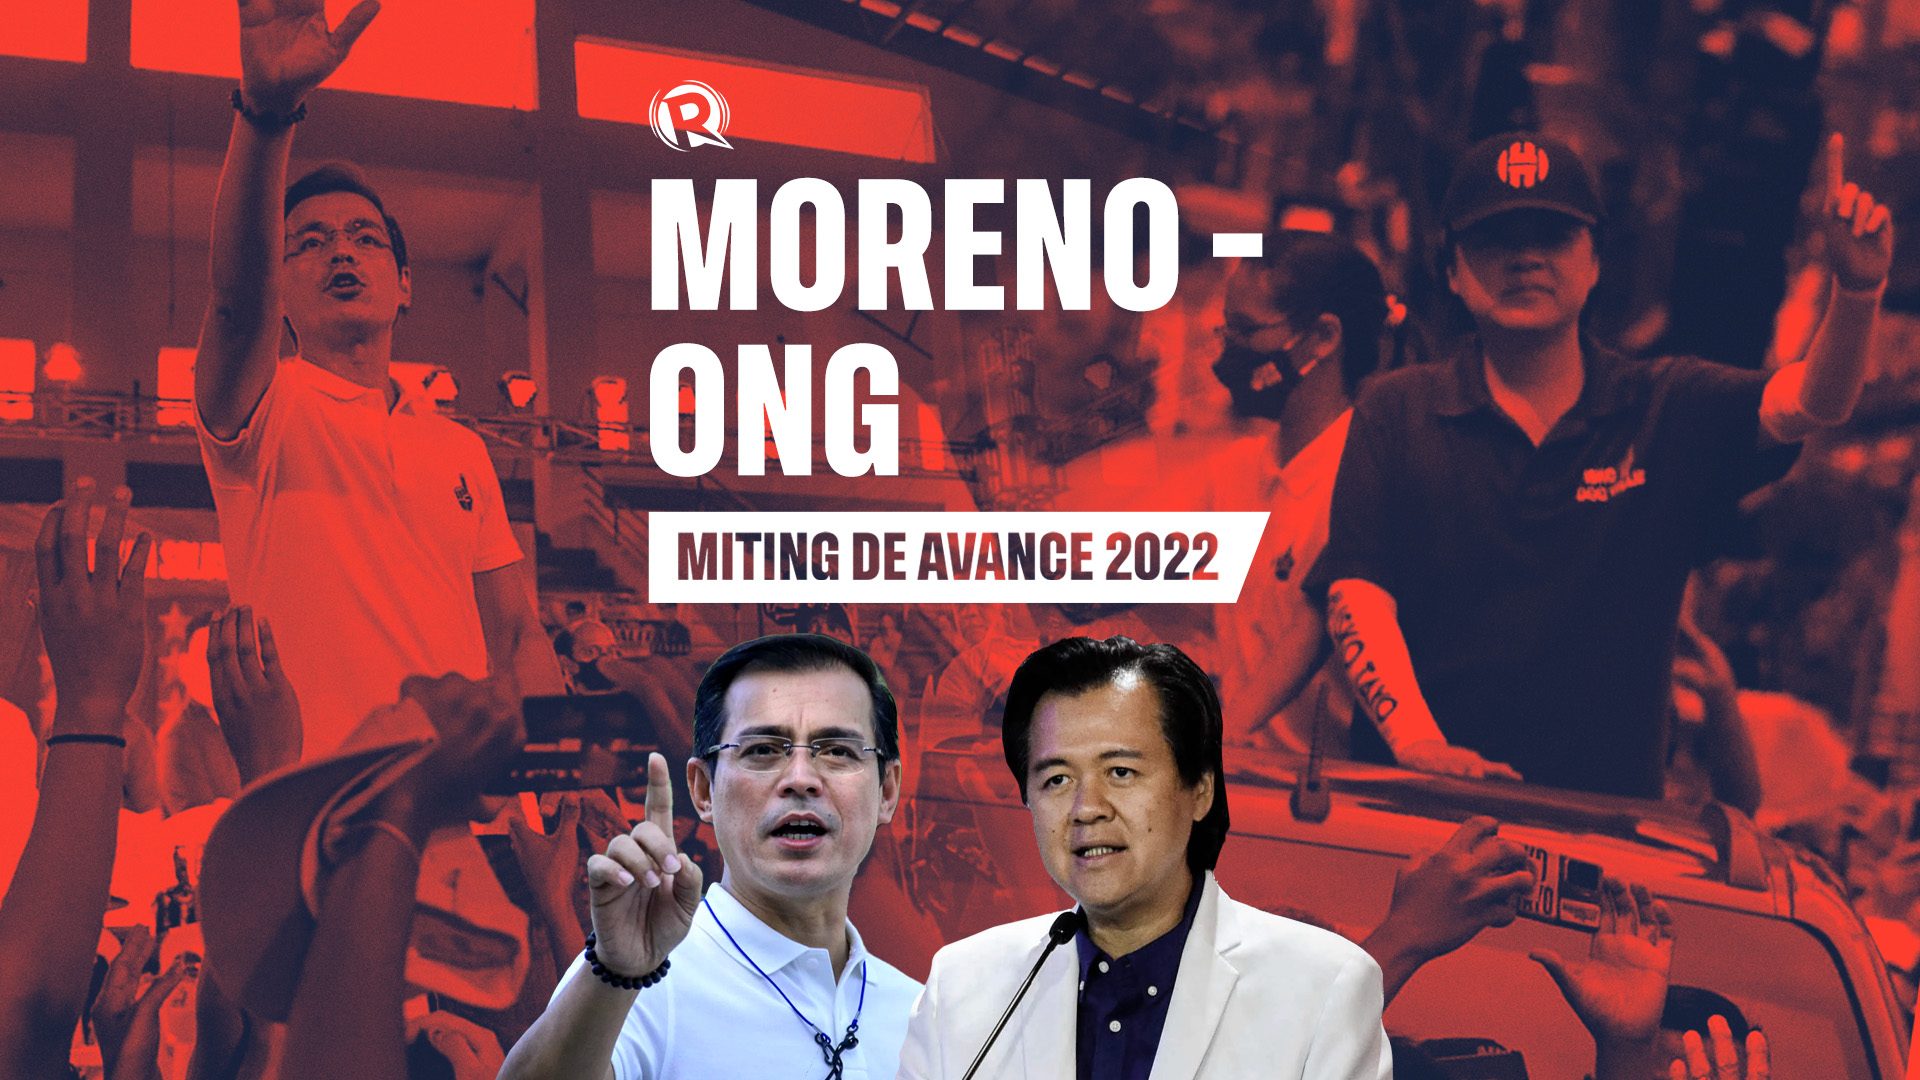 LIVE UPDATES: Moreno-Ong miting de avance – 2022 Philippine elections